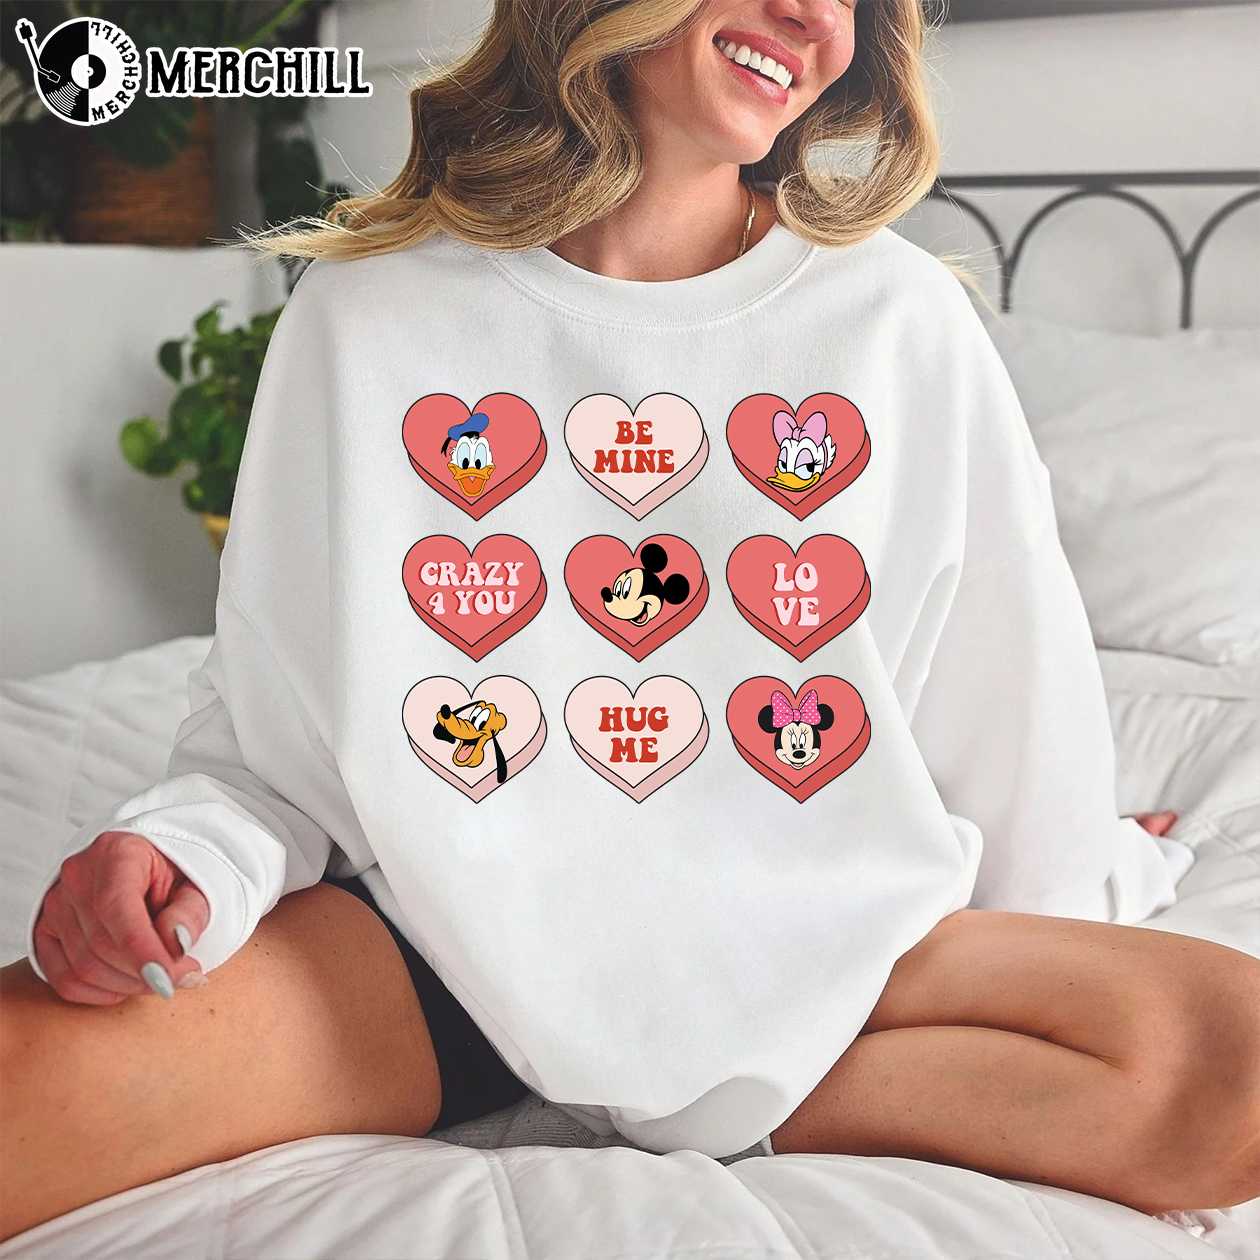 https://images.merchill.com/wp-content/uploads/2023/01/Candy-Heart-Mickey-and-Friends-Disney-Valentine-Shirt-Great-Valentines-Gifts-for-Her-2.jpg